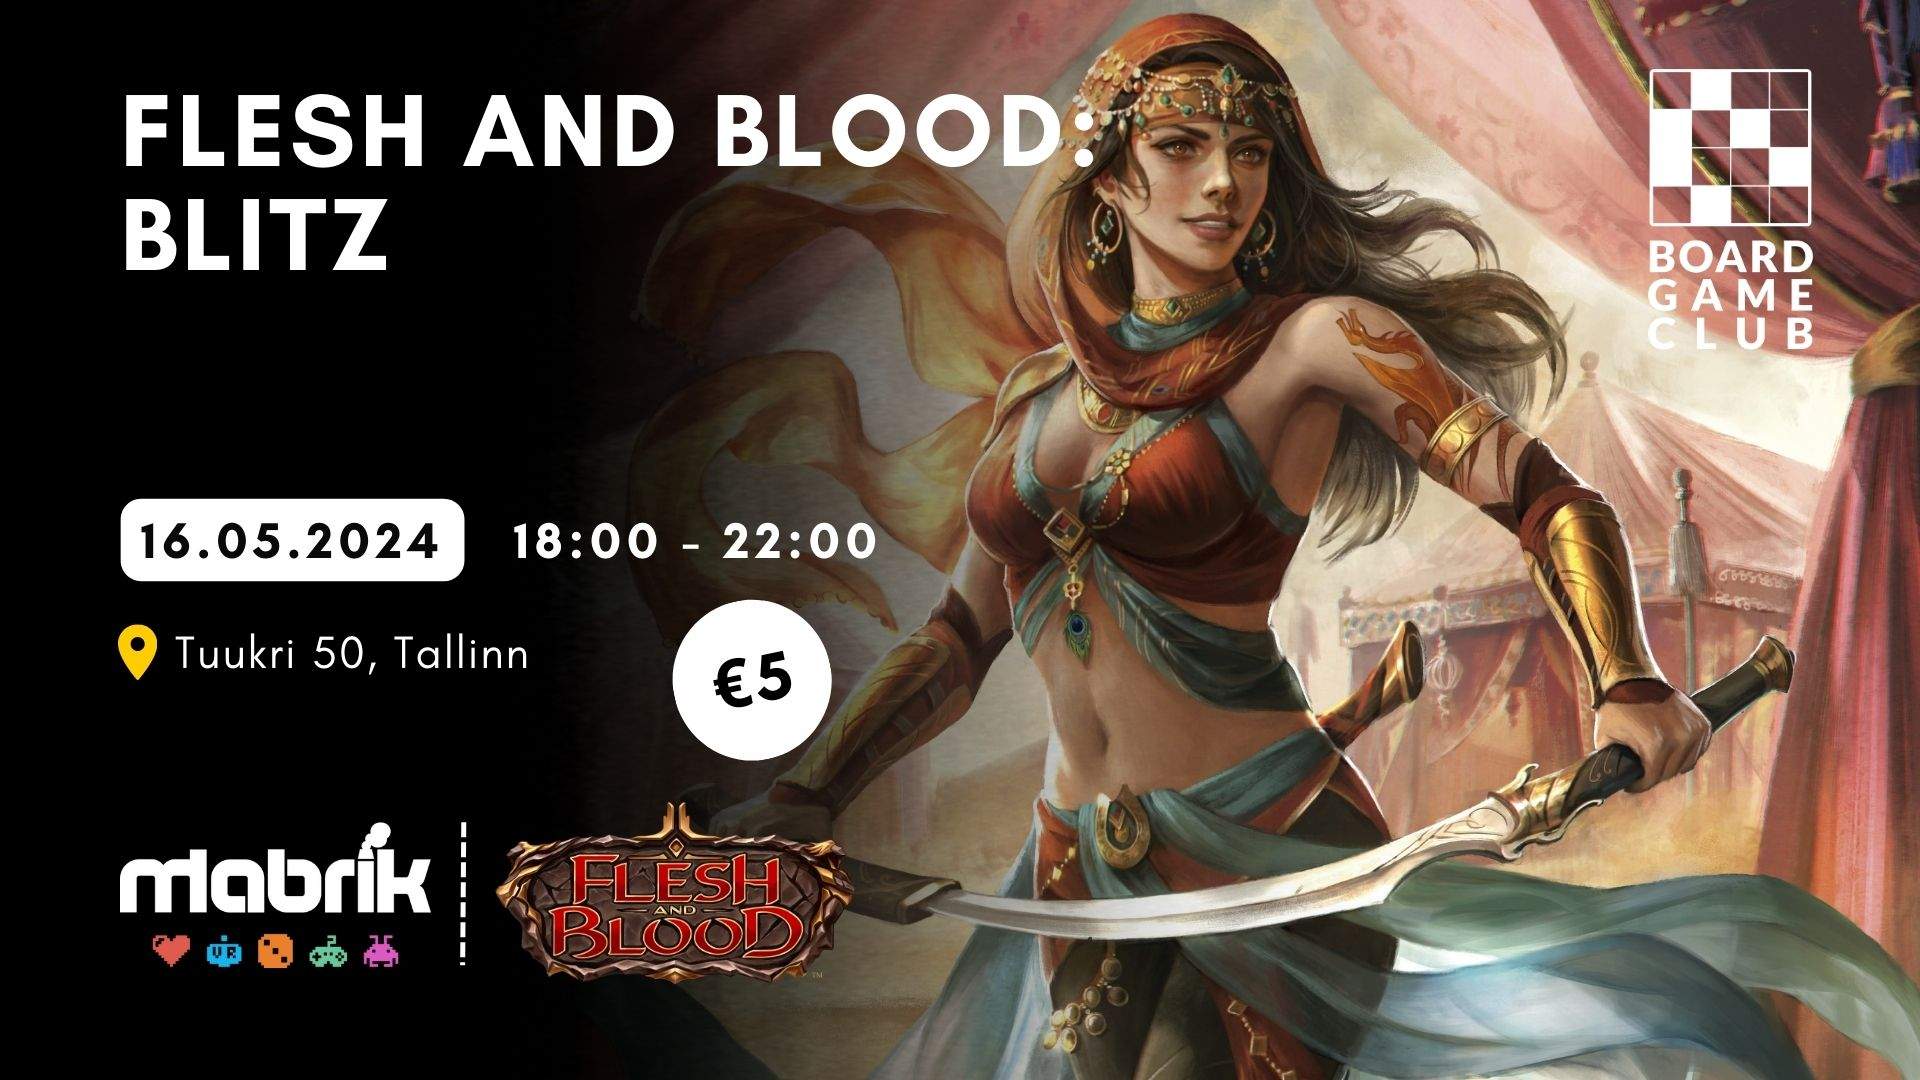 Events - 18.04.2024 - Flesh and Blood - Blitz